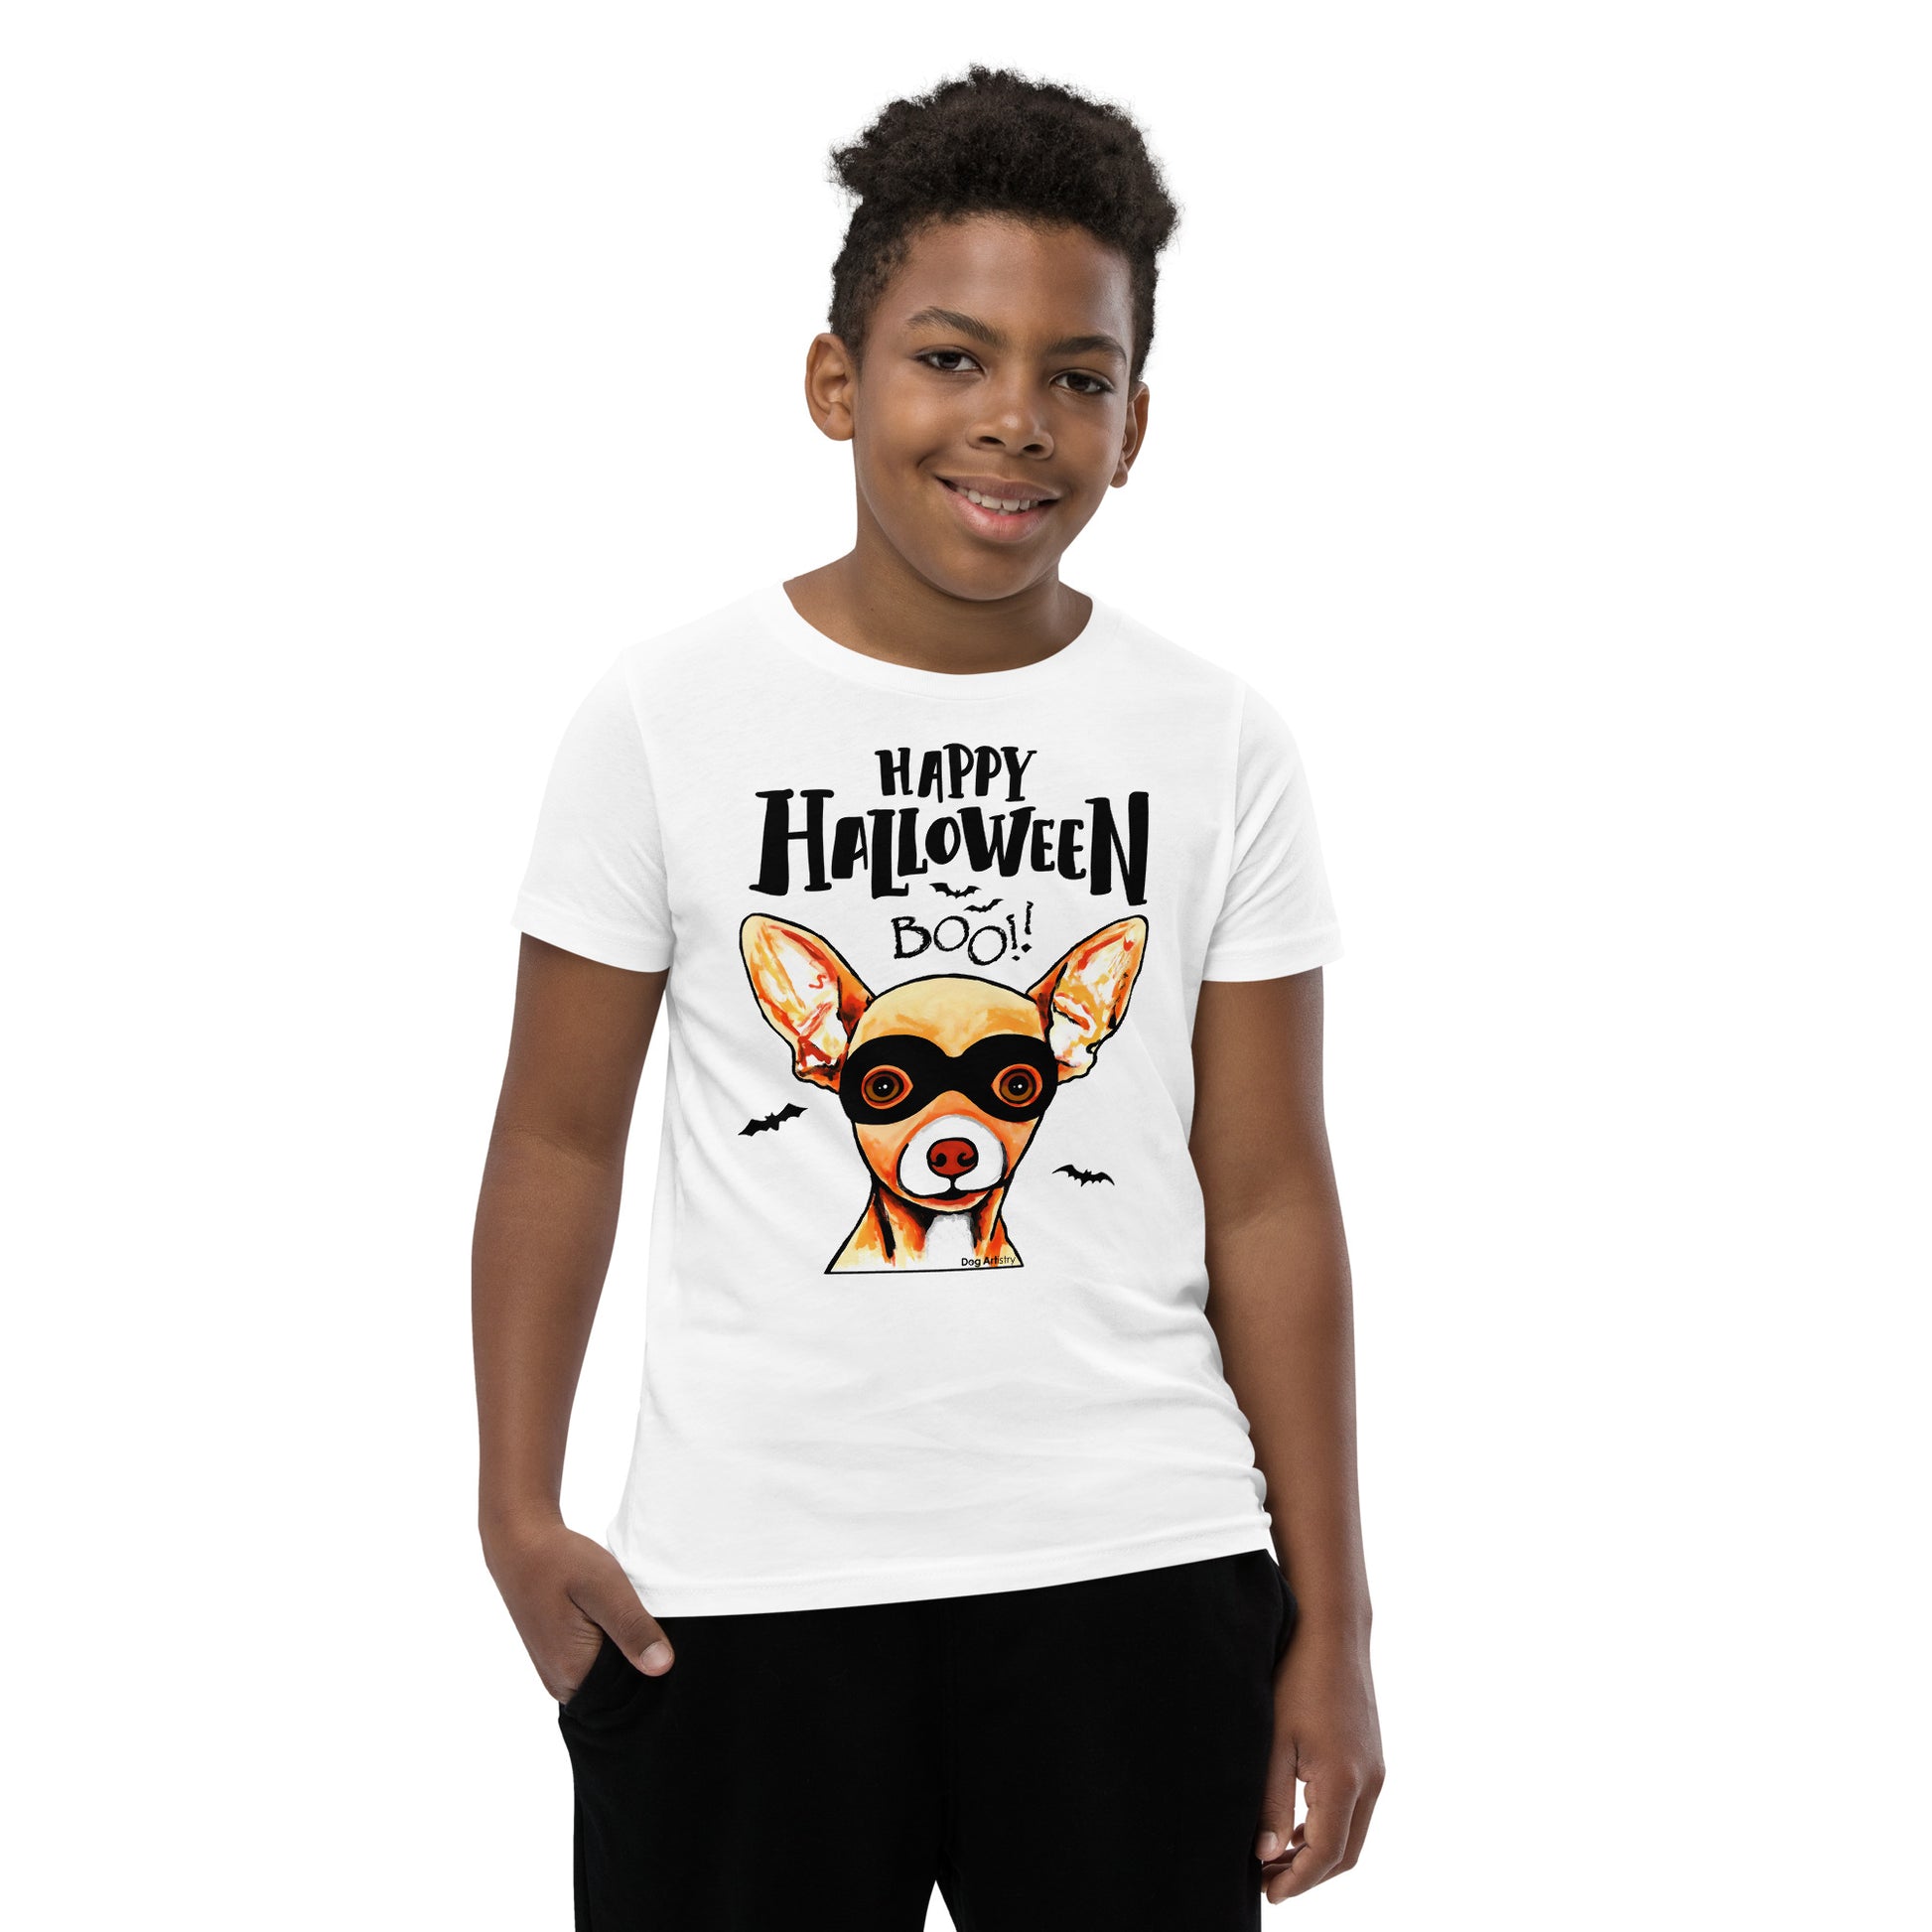 Funny Happy Chihuahua wearing mask youth white t-shirt by Dog Artistry.